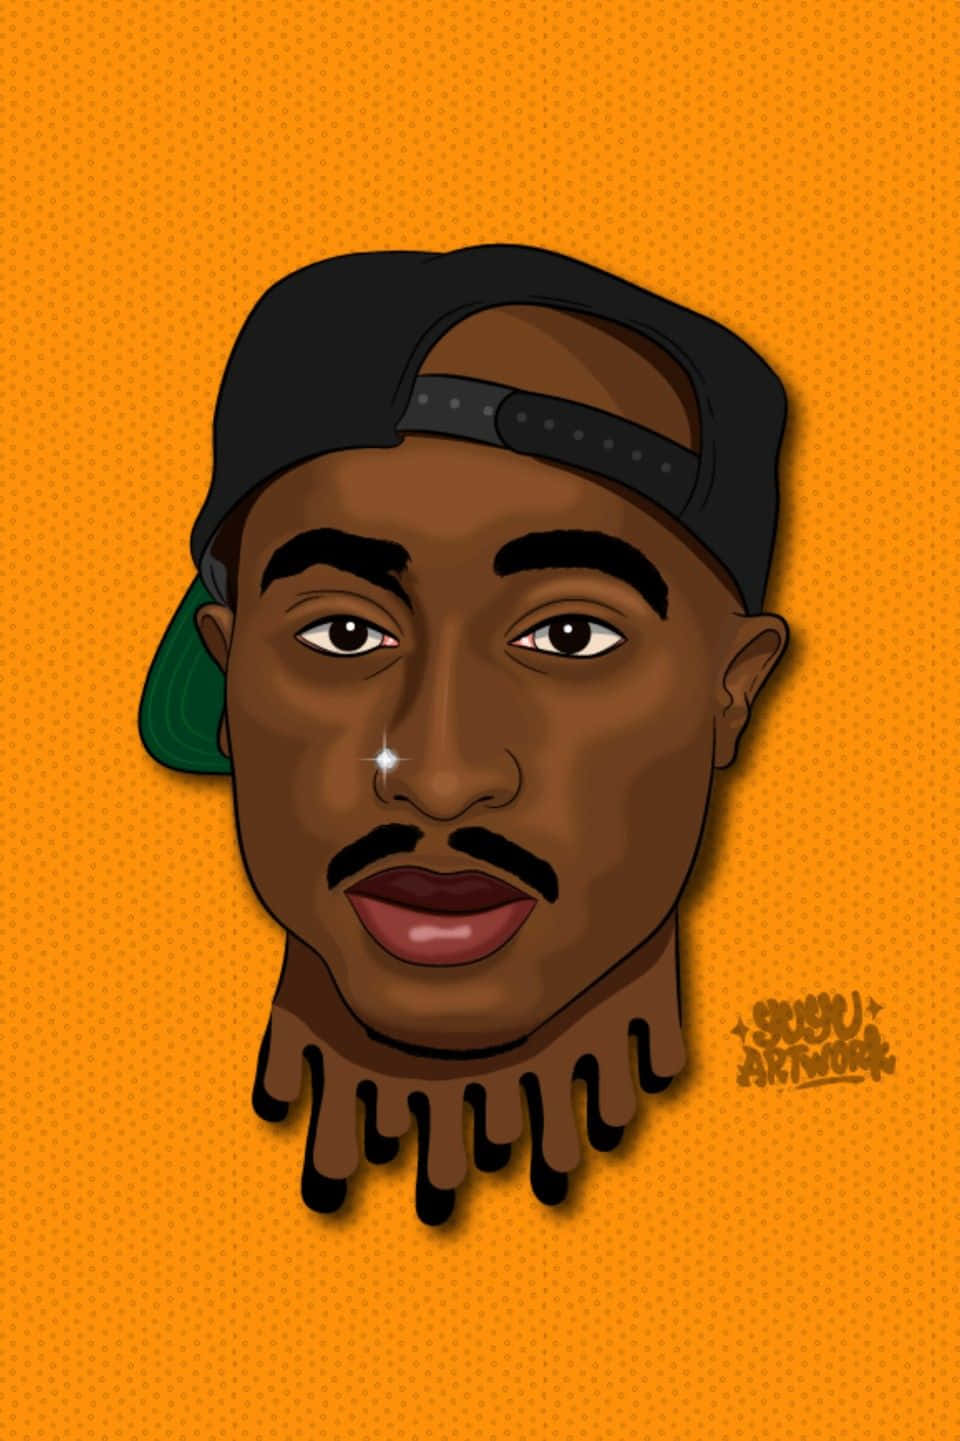 A tribute to Tupac Shakur - an icon of rap music Wallpaper